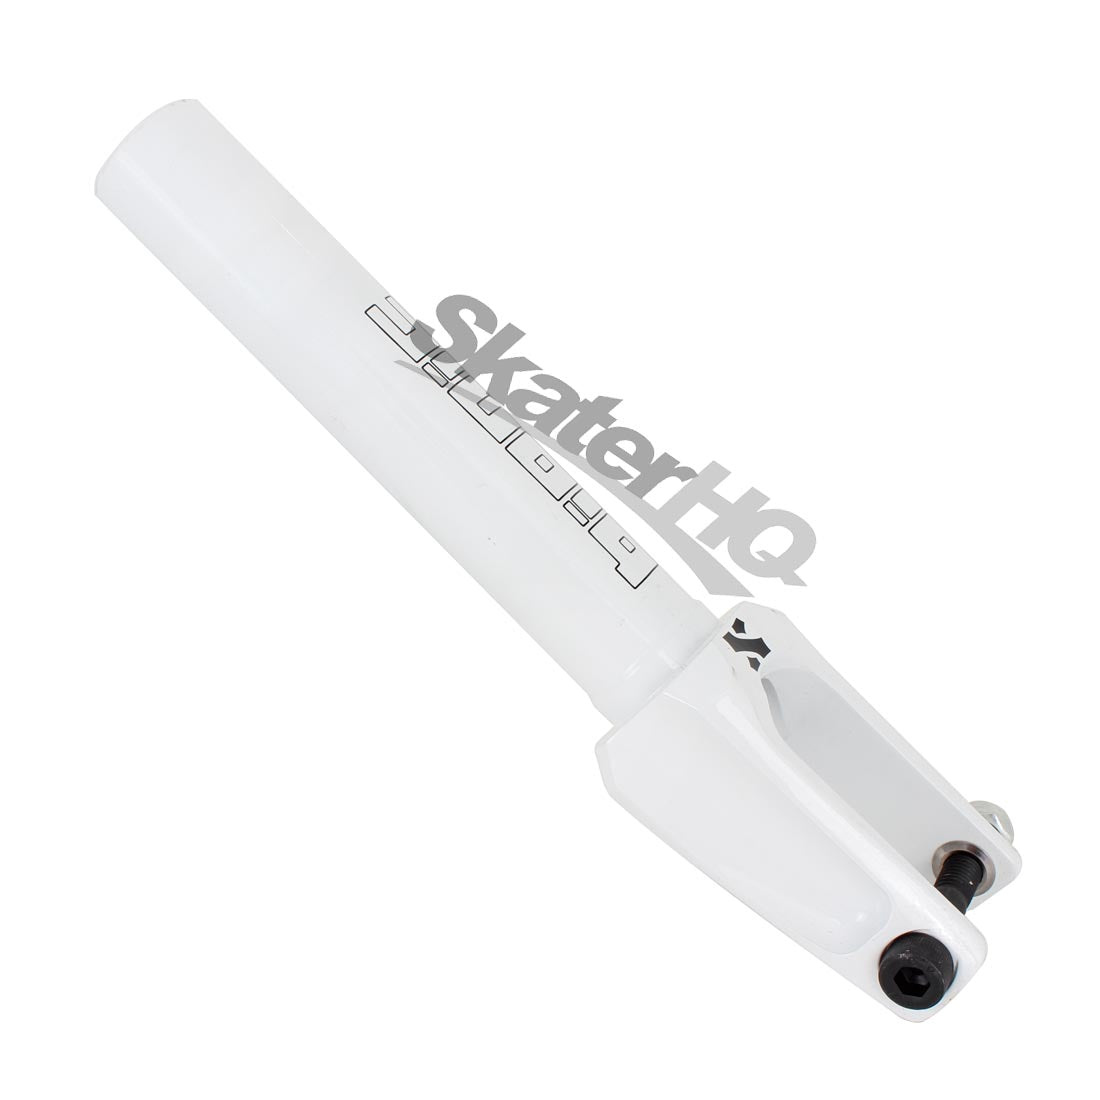 Sacrifice Bionic SCS Fork - White Scooter Forks